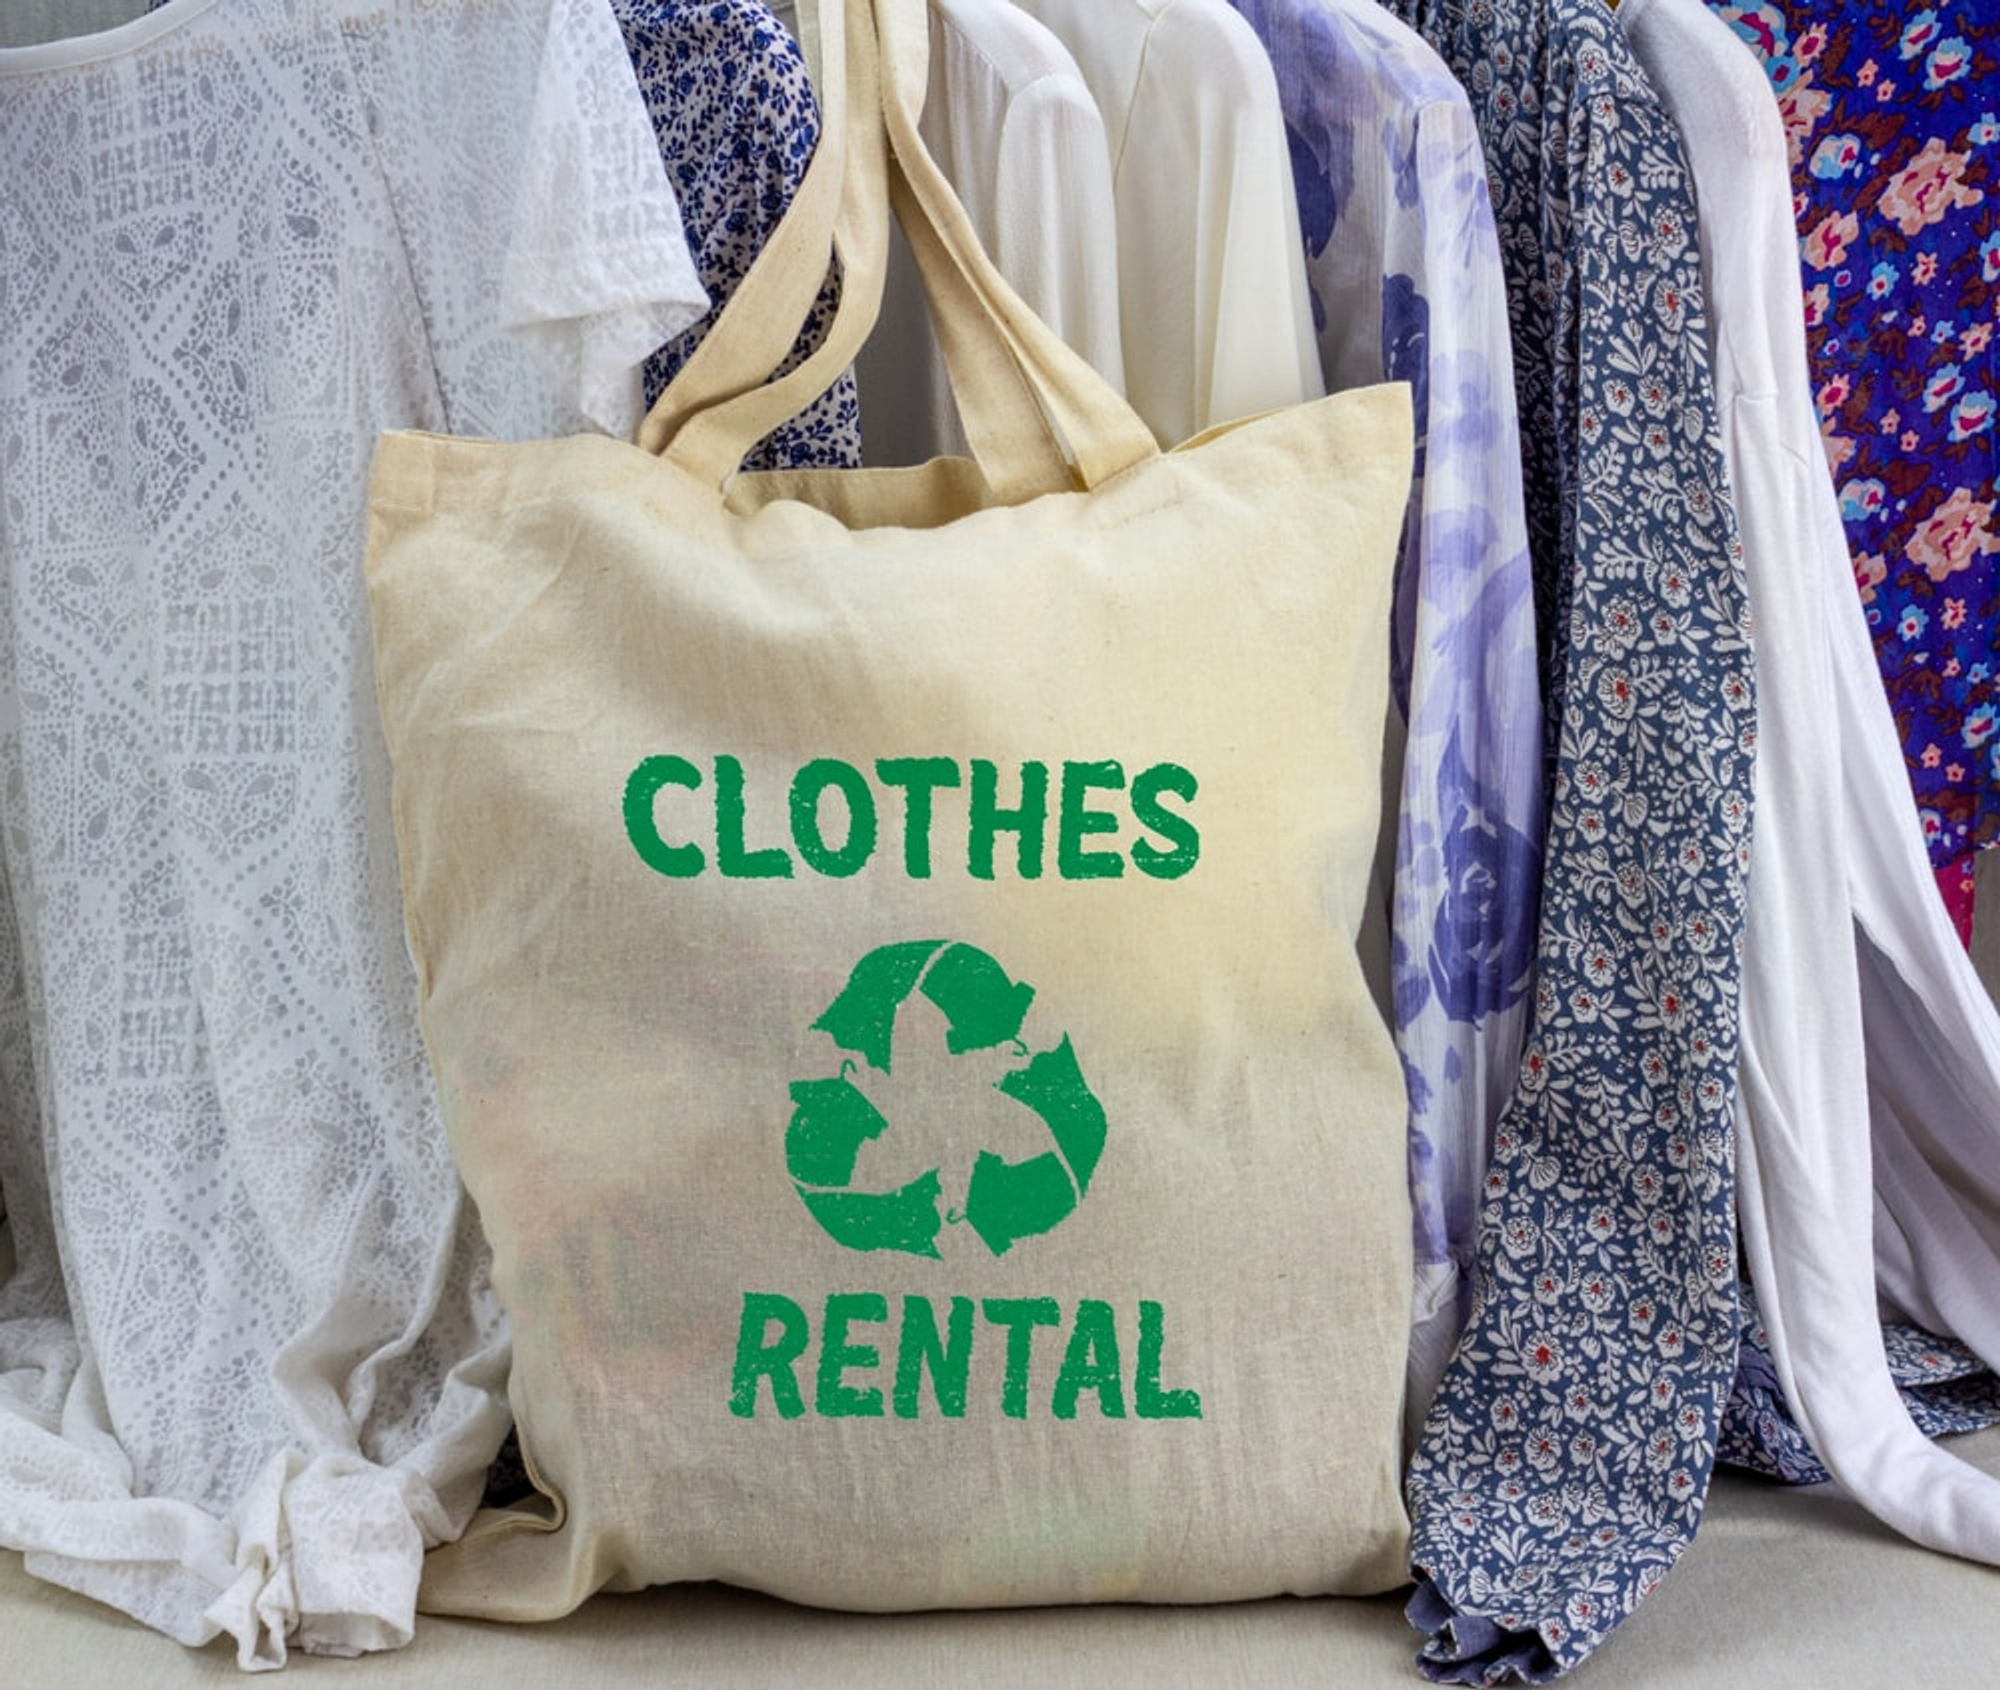 thrifting, swapping, sharing, renting fashion.